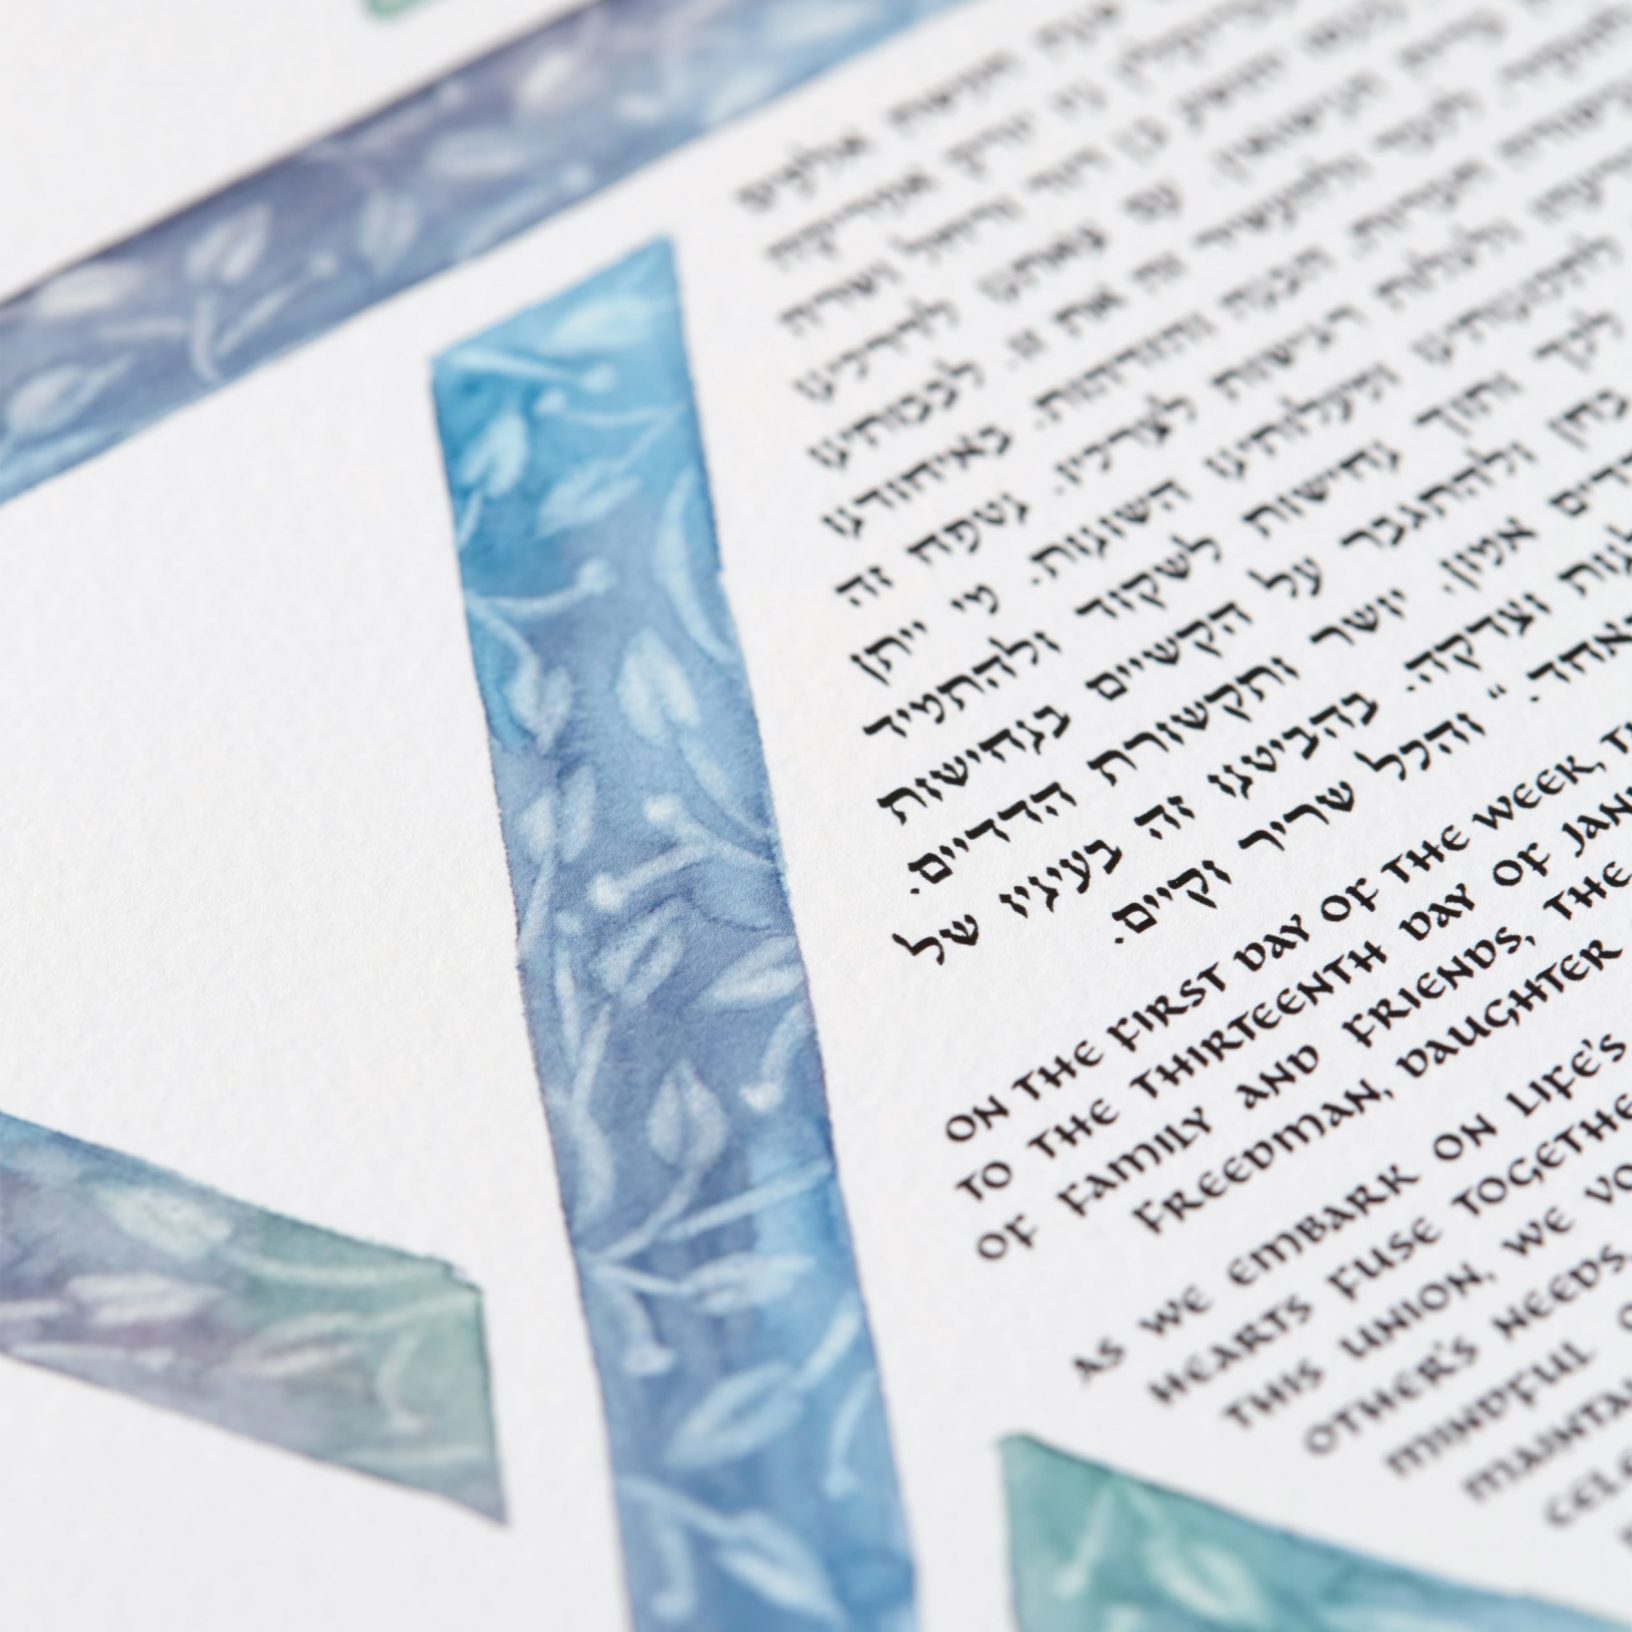 Star Of David - Ani L'Dodi Ketubah Jewish Marriage Contracts by Susan Cone Porges